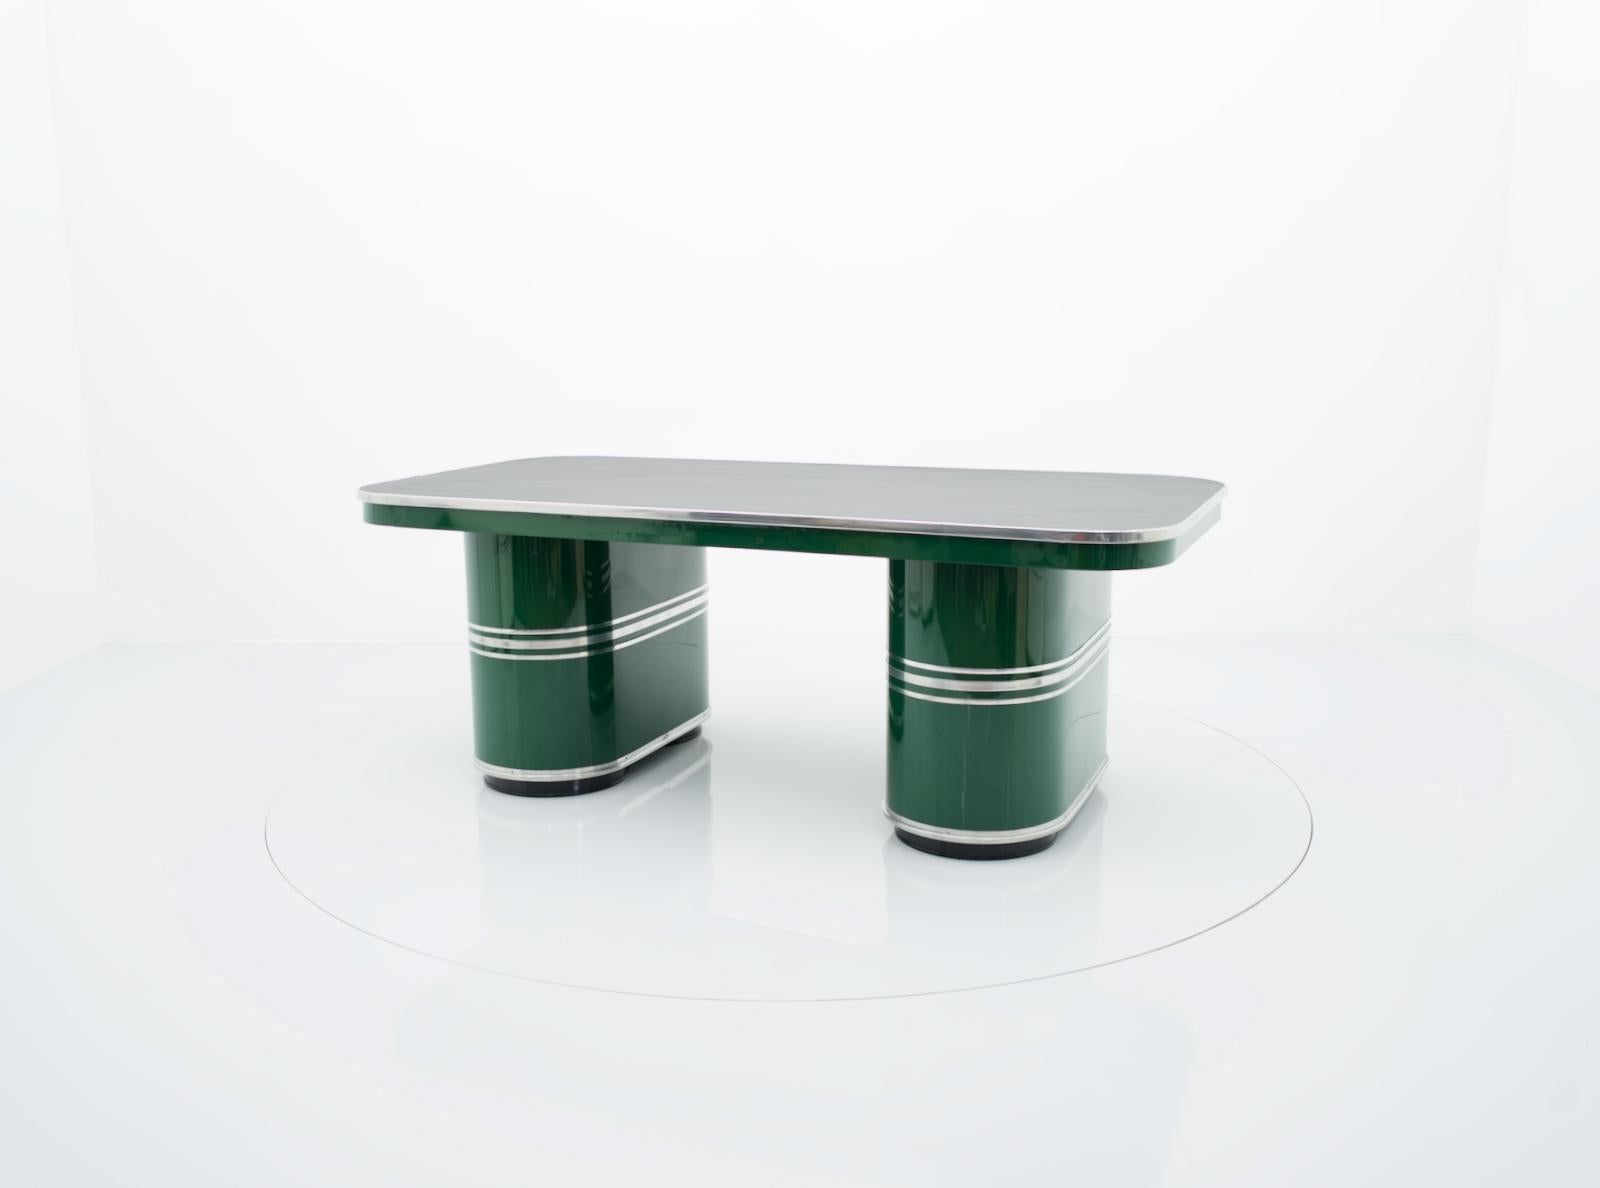 Mauser Rundform 'Berlin' Writing Desk in British Racing Green, Germany, 1950 For Sale 10